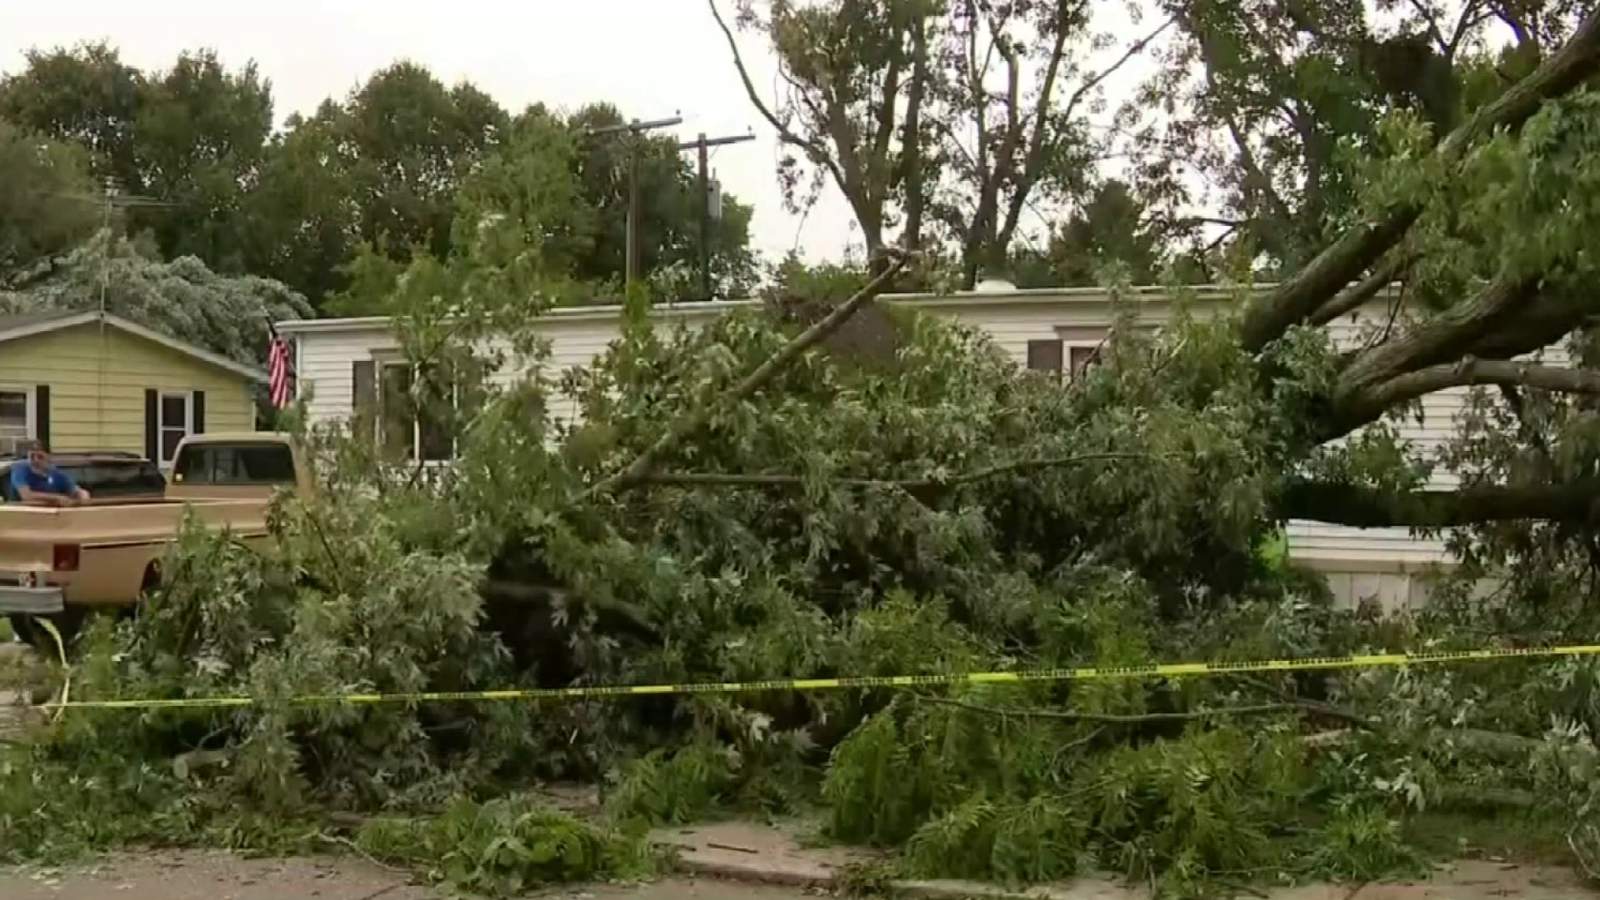 Storms bring down trees, power lines across Metro Detroit